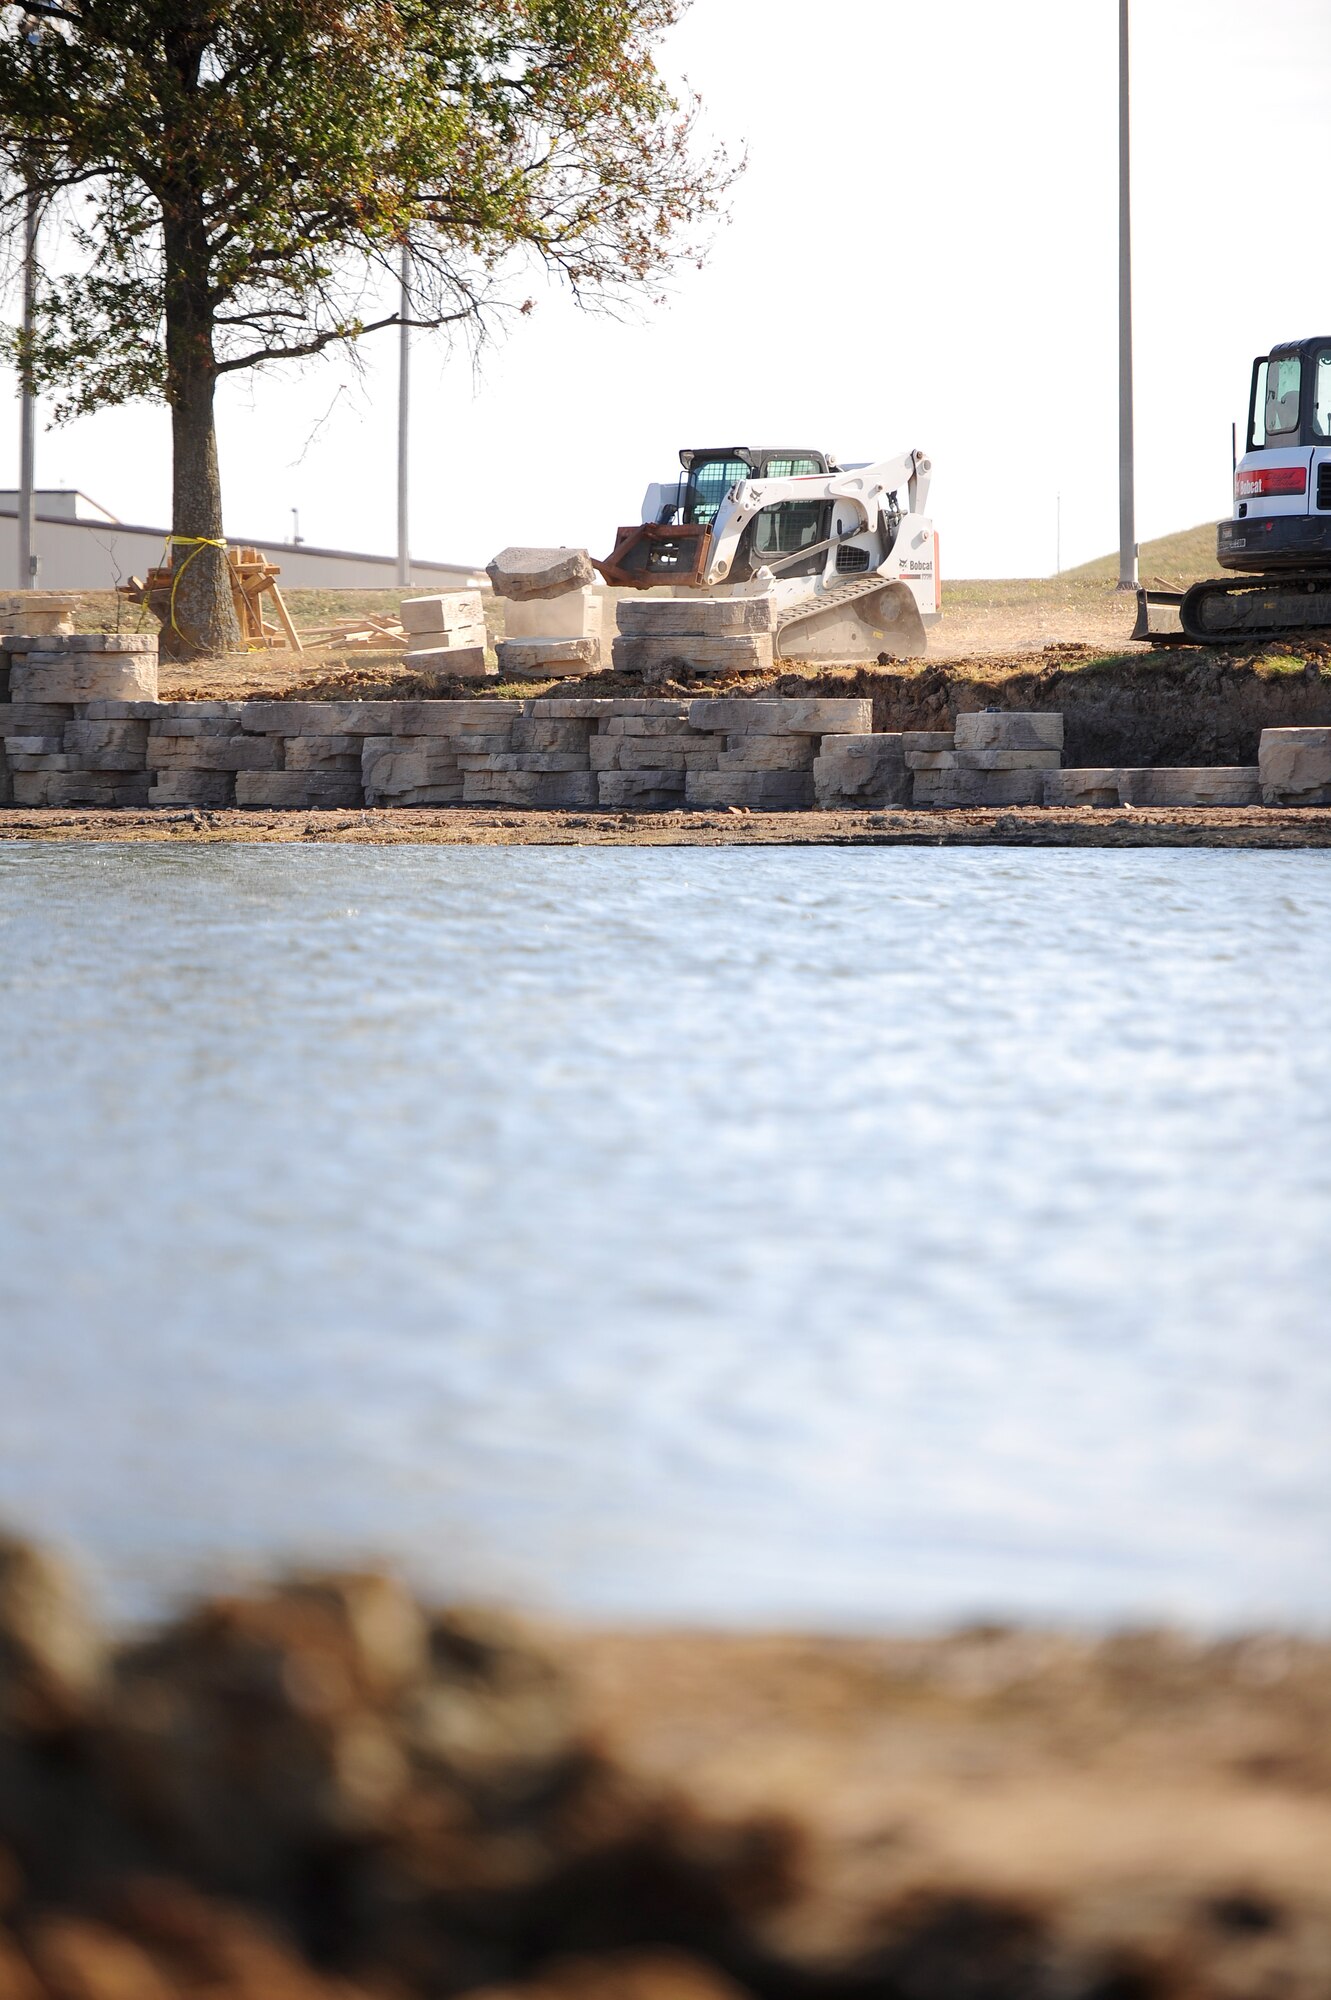 A contractor operates a Bobcat skid-steer loader to transfer bricks near the edge of Ike Skelton Lake Oct. 20, 2015, at Whiteman Air Force Base, Mo. To decrease algae and weed growth in shallow areas of the pond, the shoreline is being reinforced with a brick wall and is scheduled to be closed until December 2015. (U.S. Air Force photo by Airman 1st Class Jazmin Smith/Released)